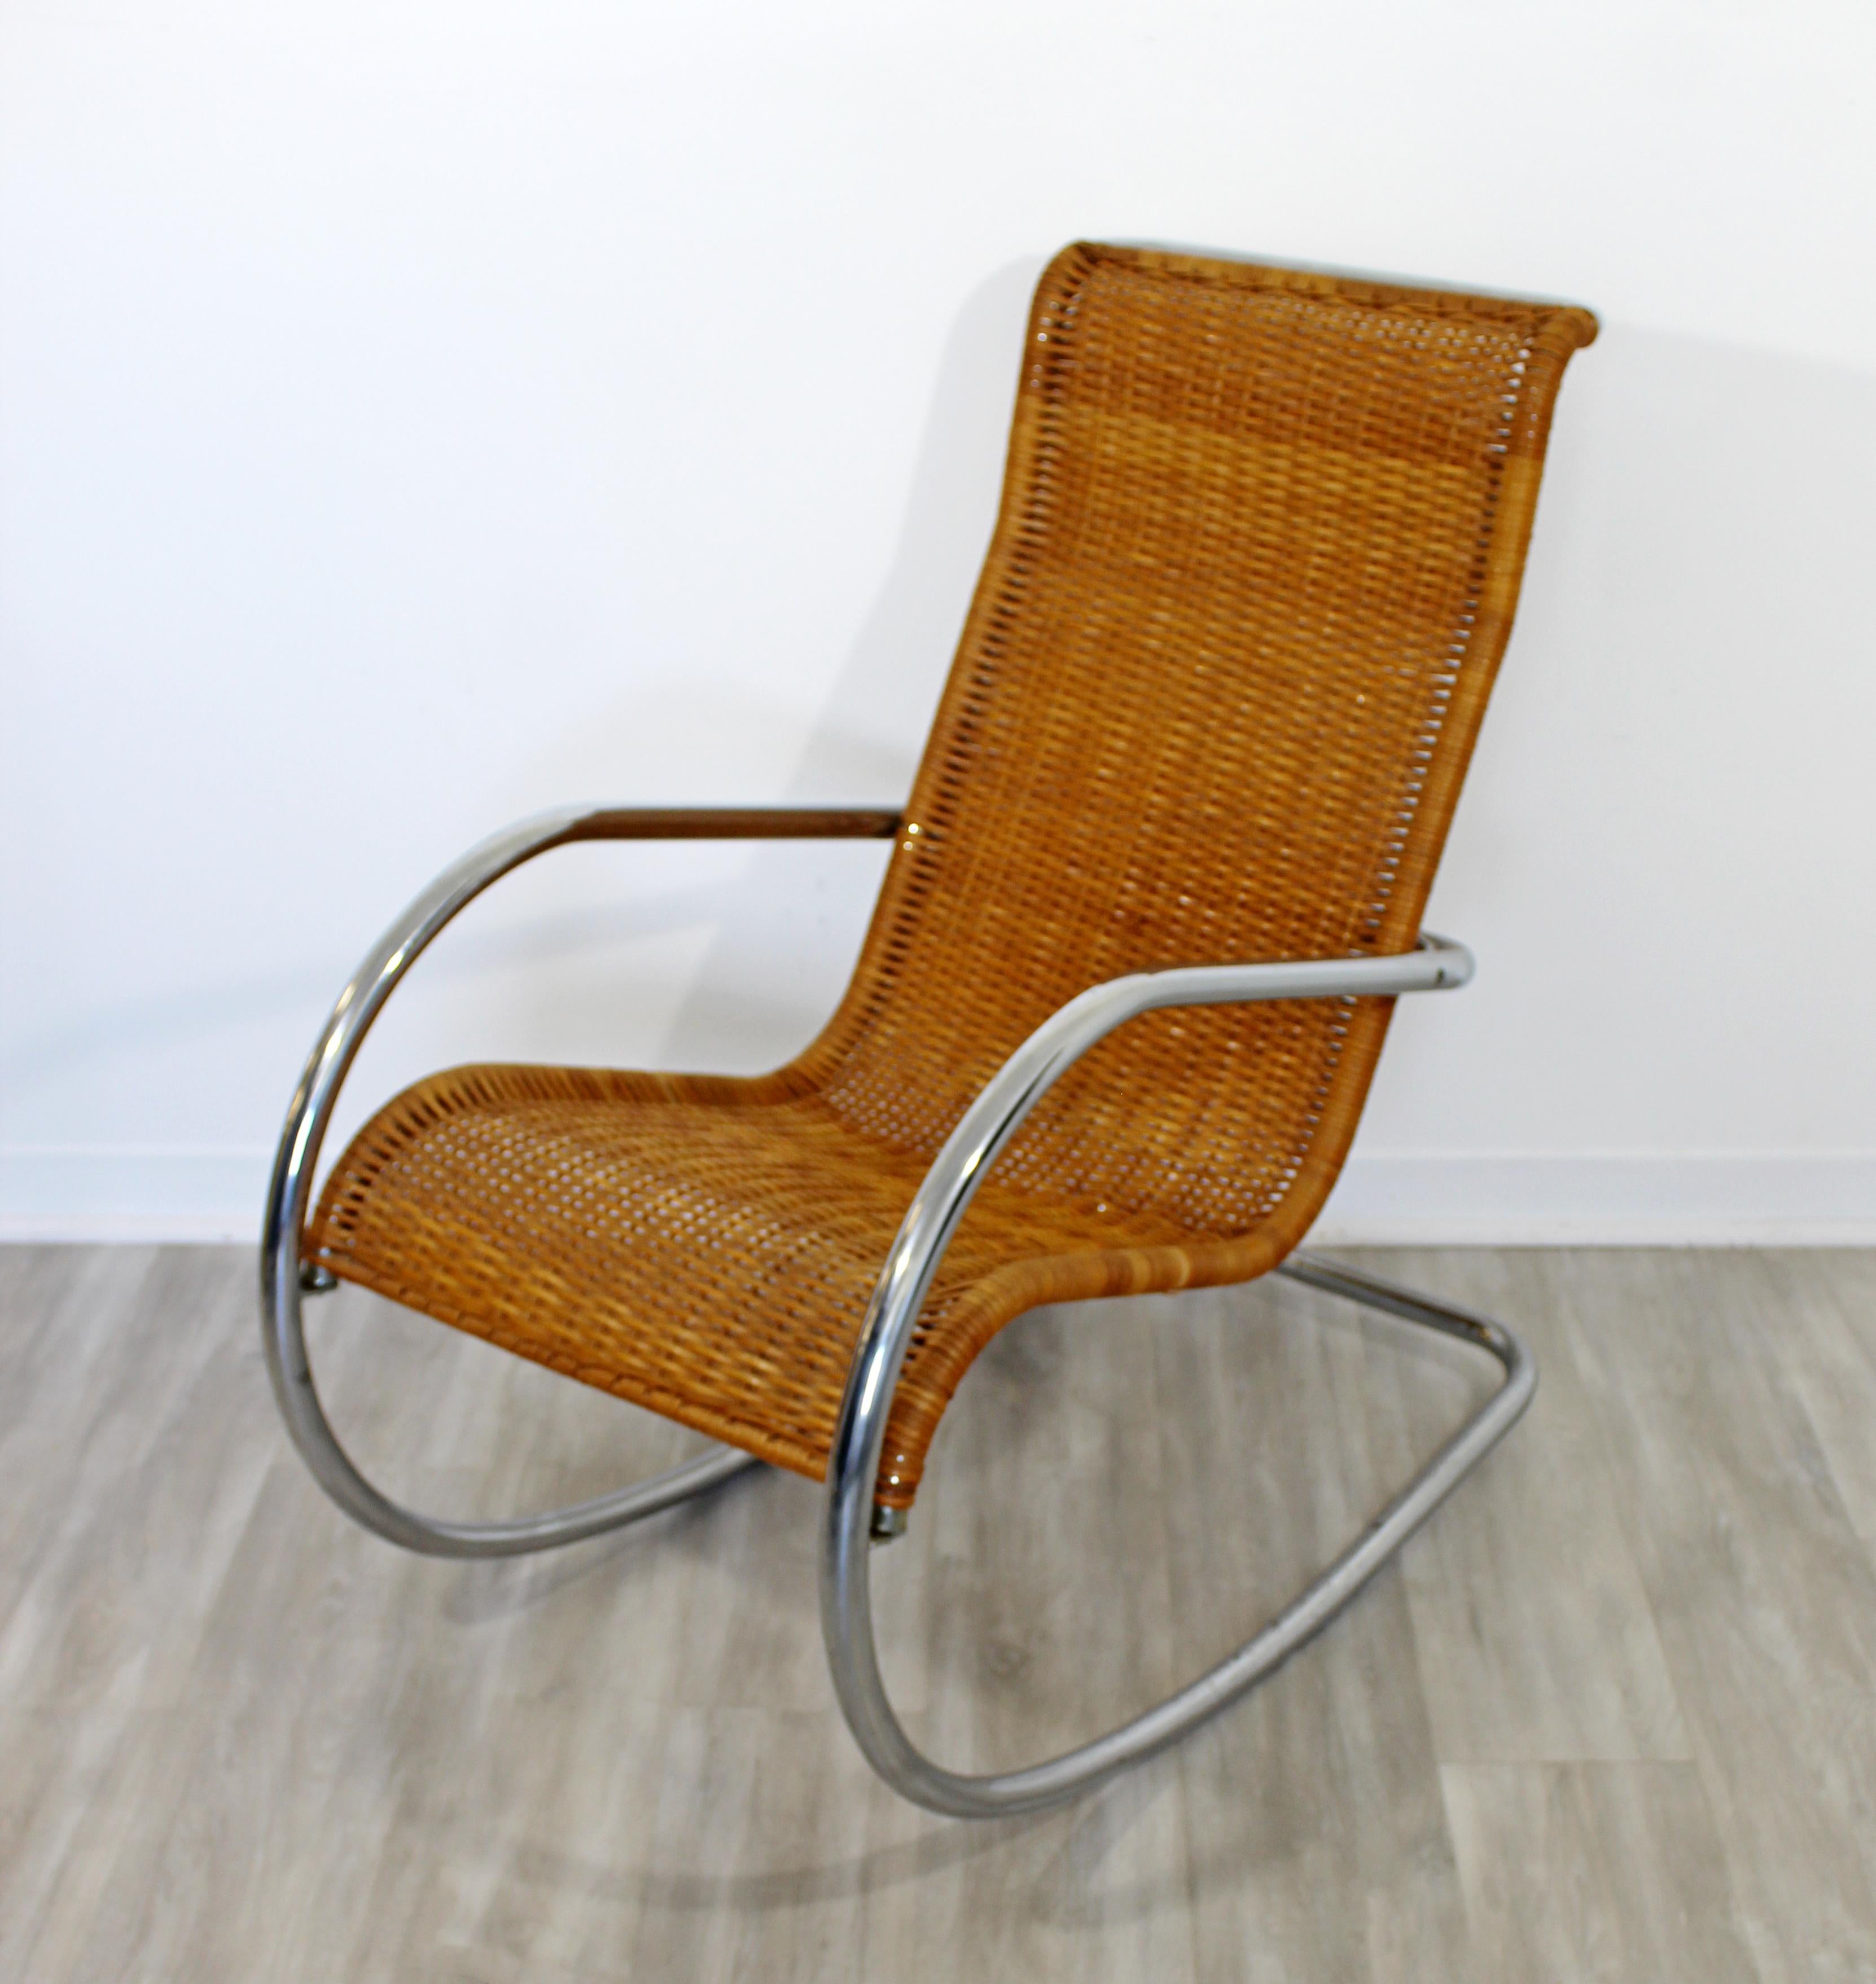 For your consideration is a beautiful rocking chair, made of tubular chrome and rattan in the style of Mies Van Der Rohe, made in Italy, circa 1970s. In very good vintage condition. The dimensions are 21